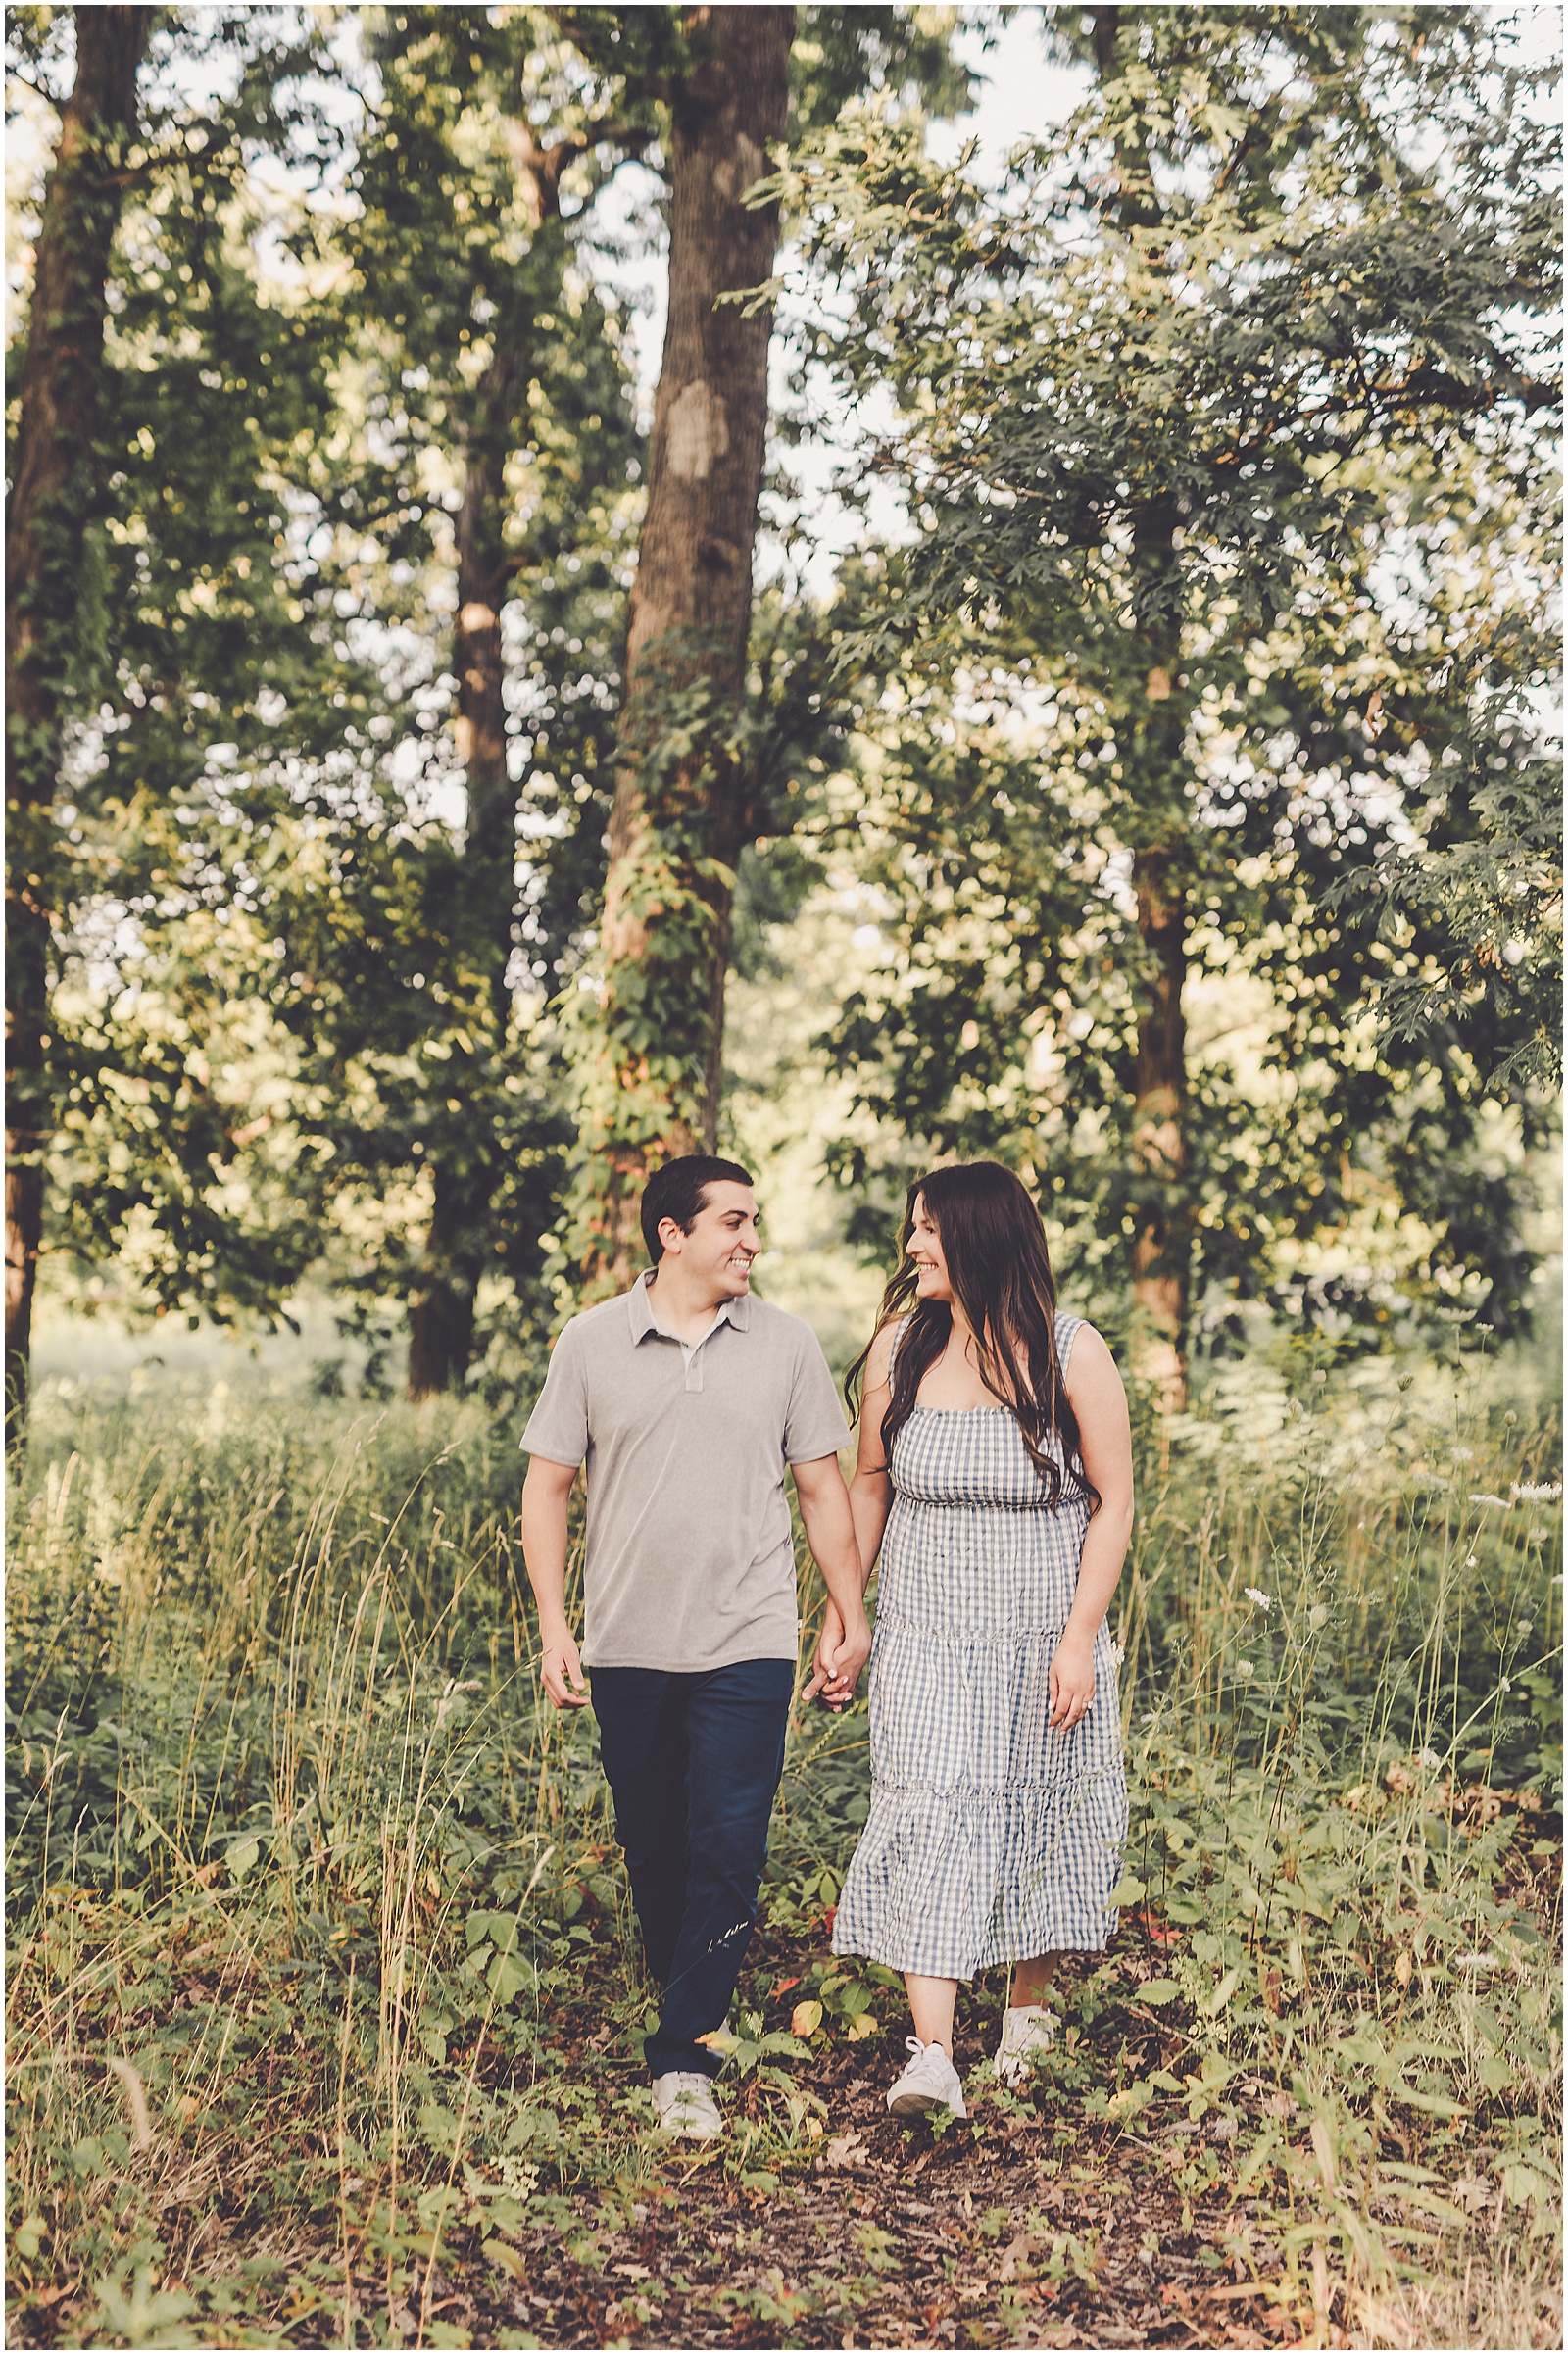 Lauren & Kyle's Cantigny Park engagement session in Wheaton with Chicagoland wedding photographer Kara Evans Photographer.